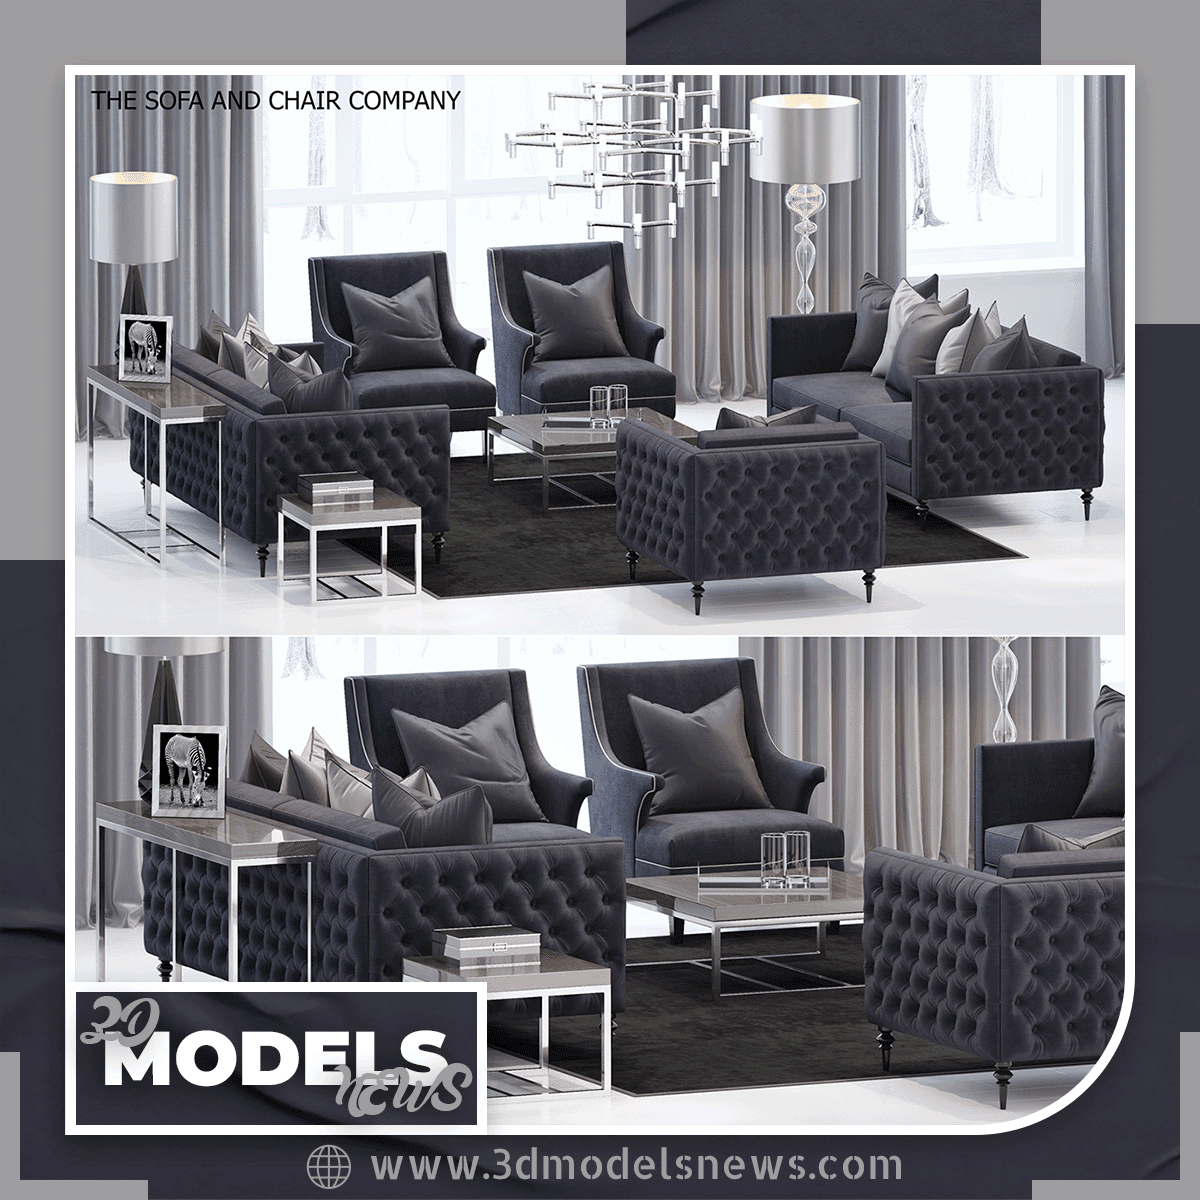 The Sofa and Chair Model Company Set 4